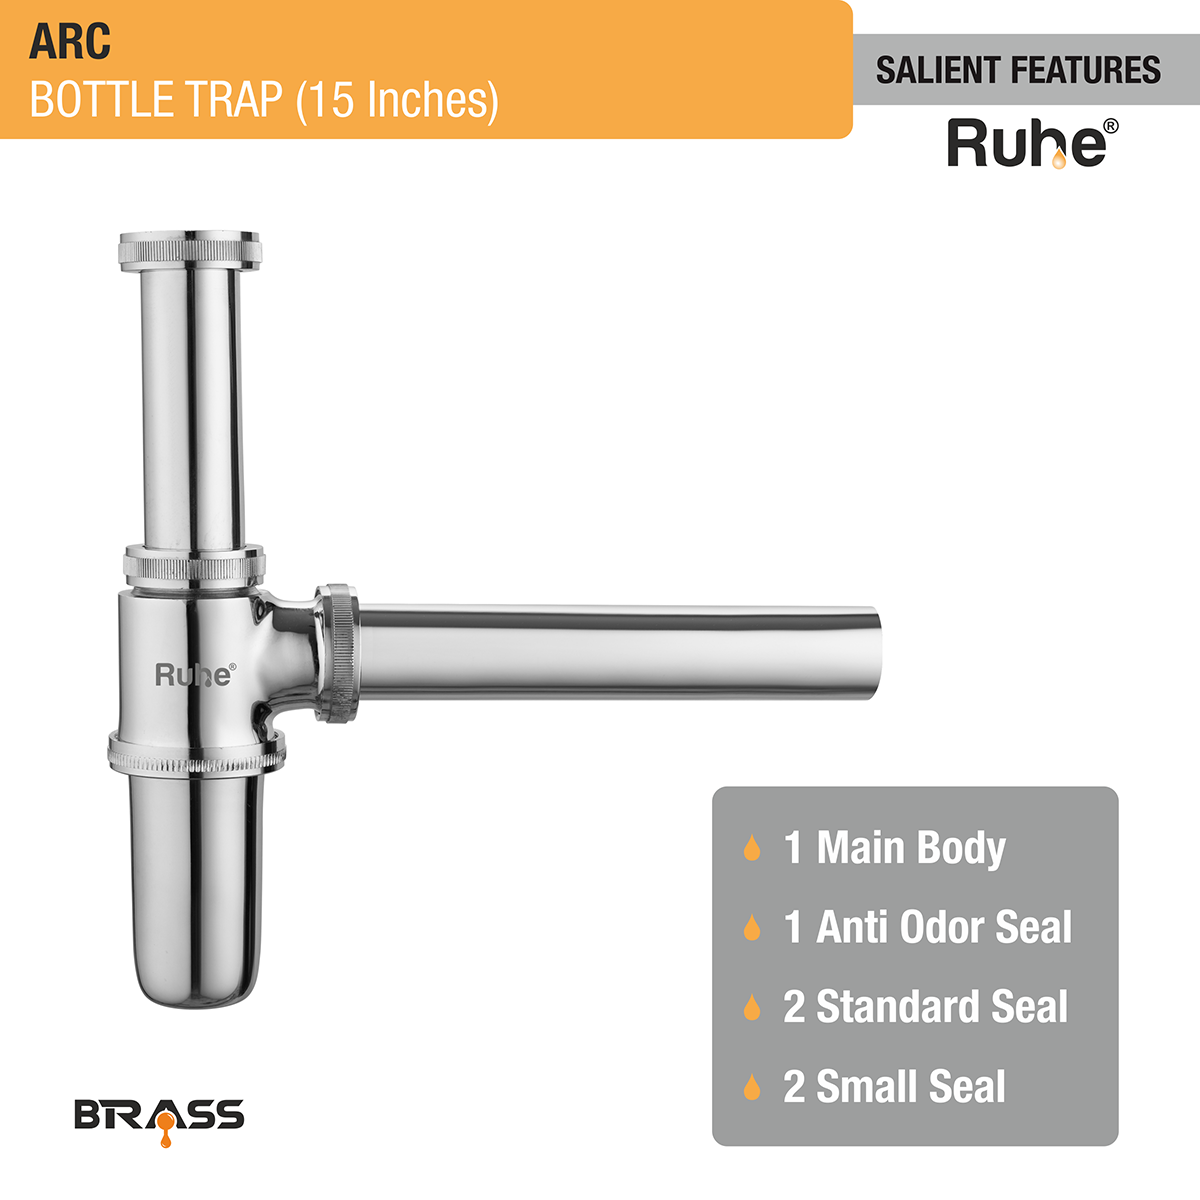 ARC Bottle Trap (15 inches) features and benefits